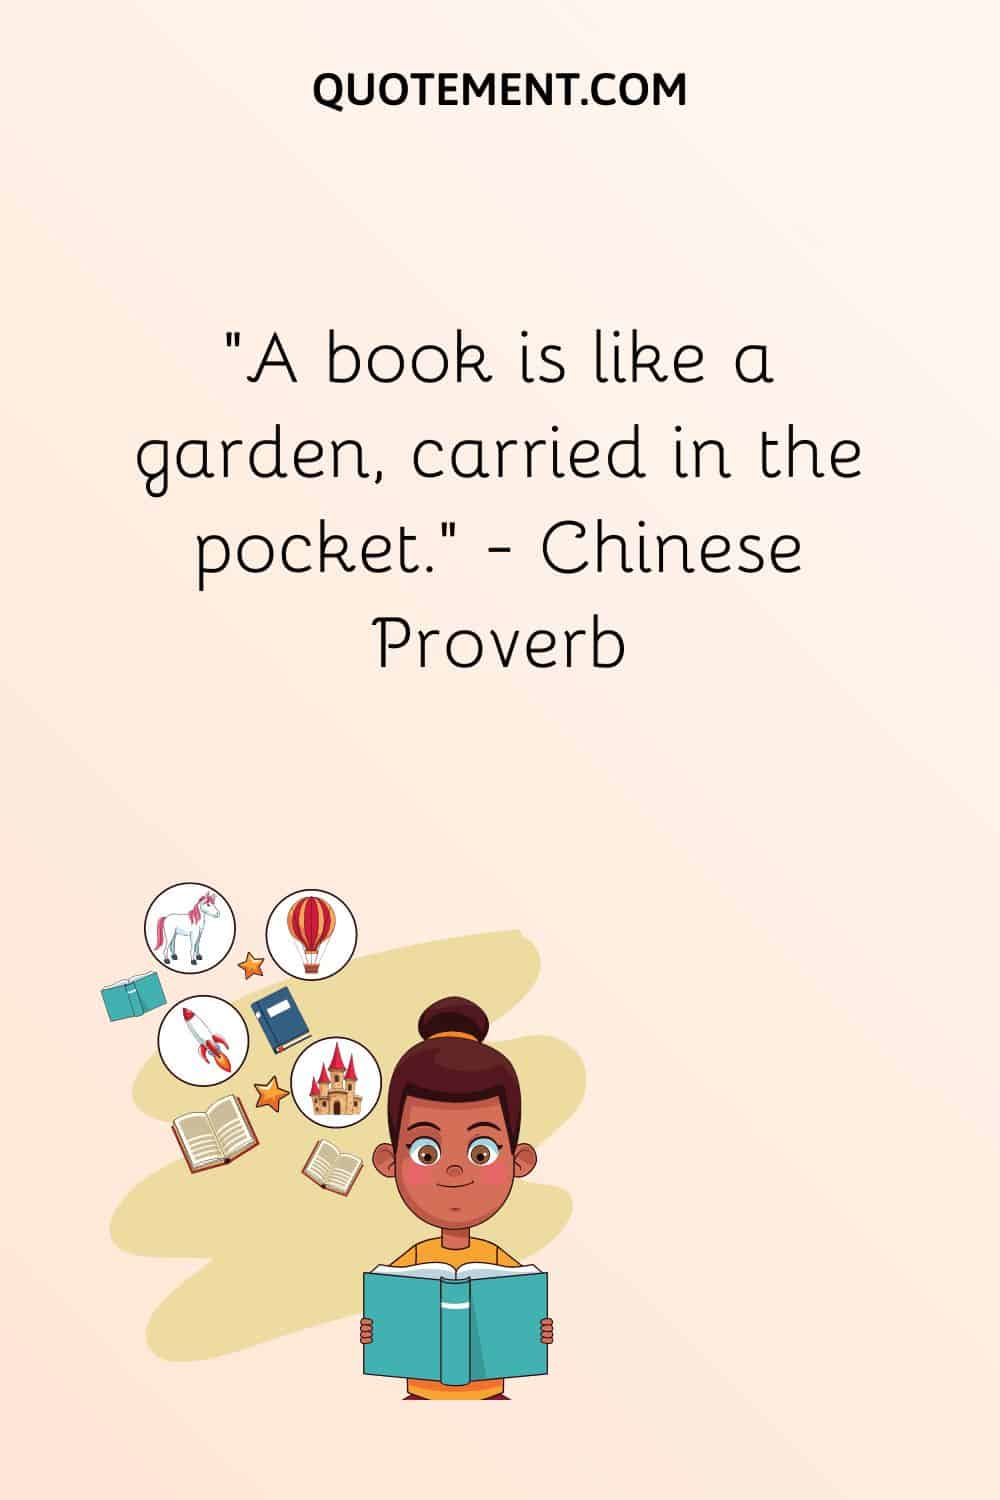 “A book is like a garden, carried in the pocket.” — Chinese Proverb